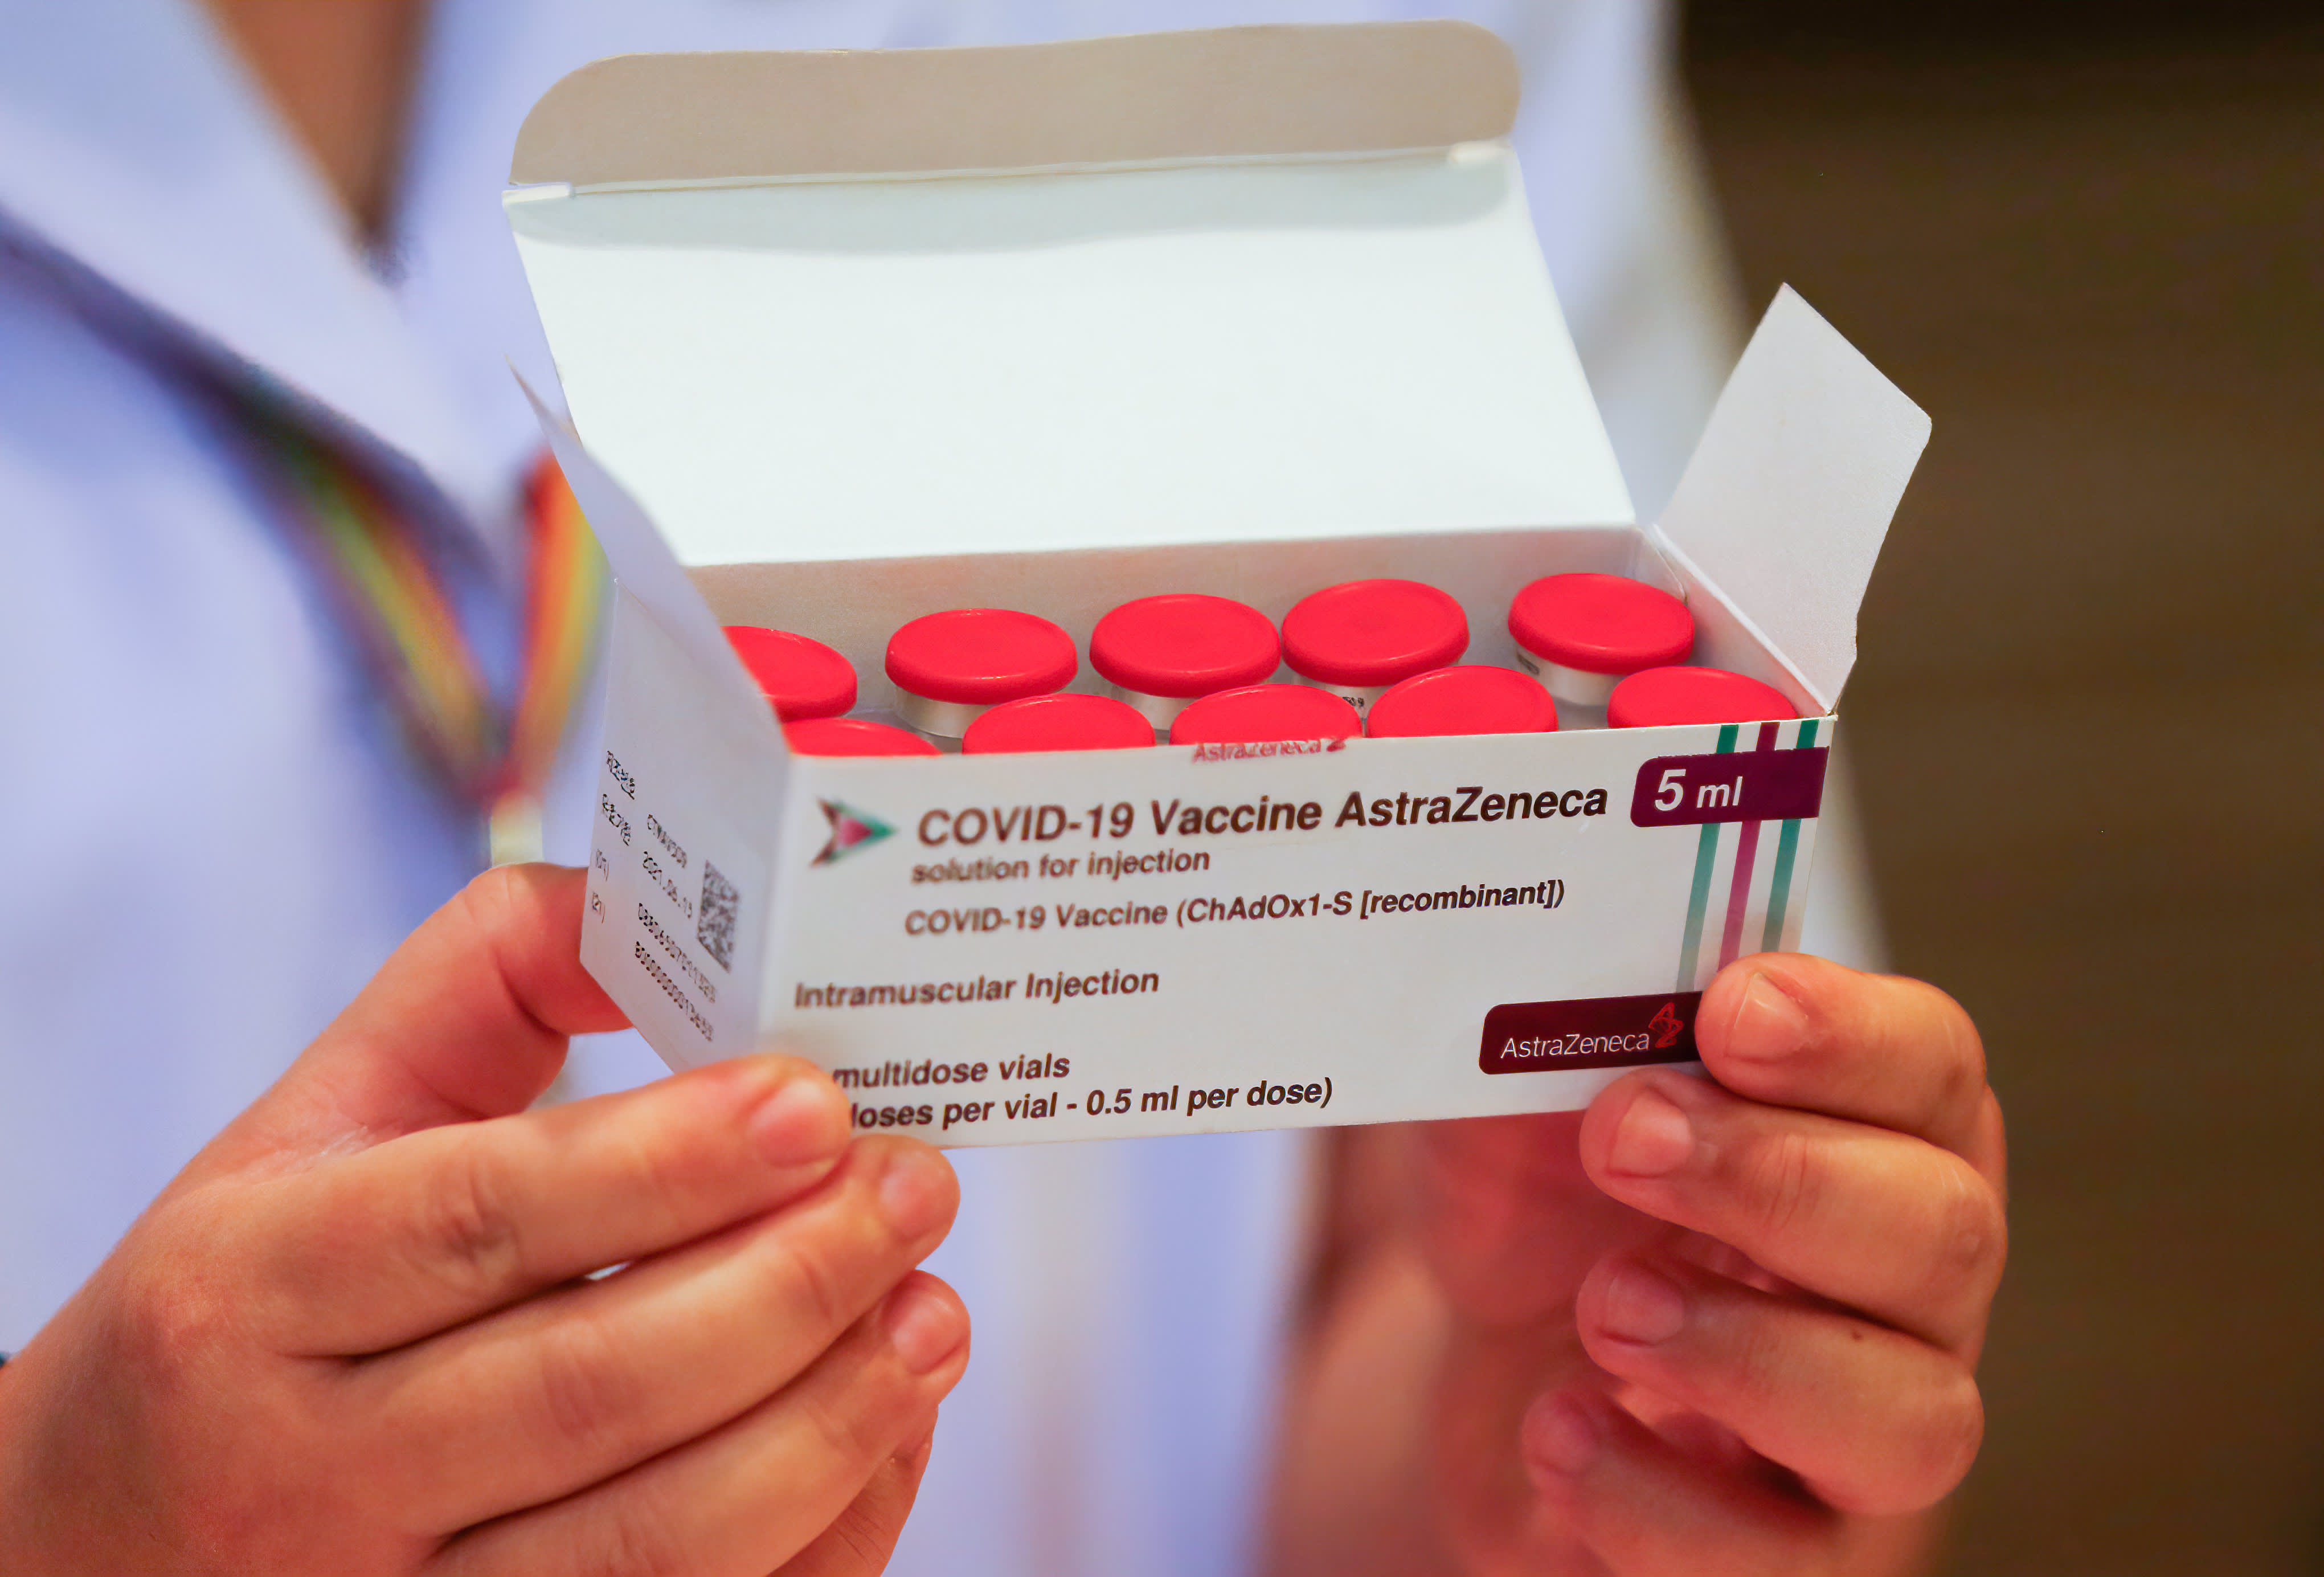 AstraZeneca Covid vaccine suspended in some countries due to fear of blood clots